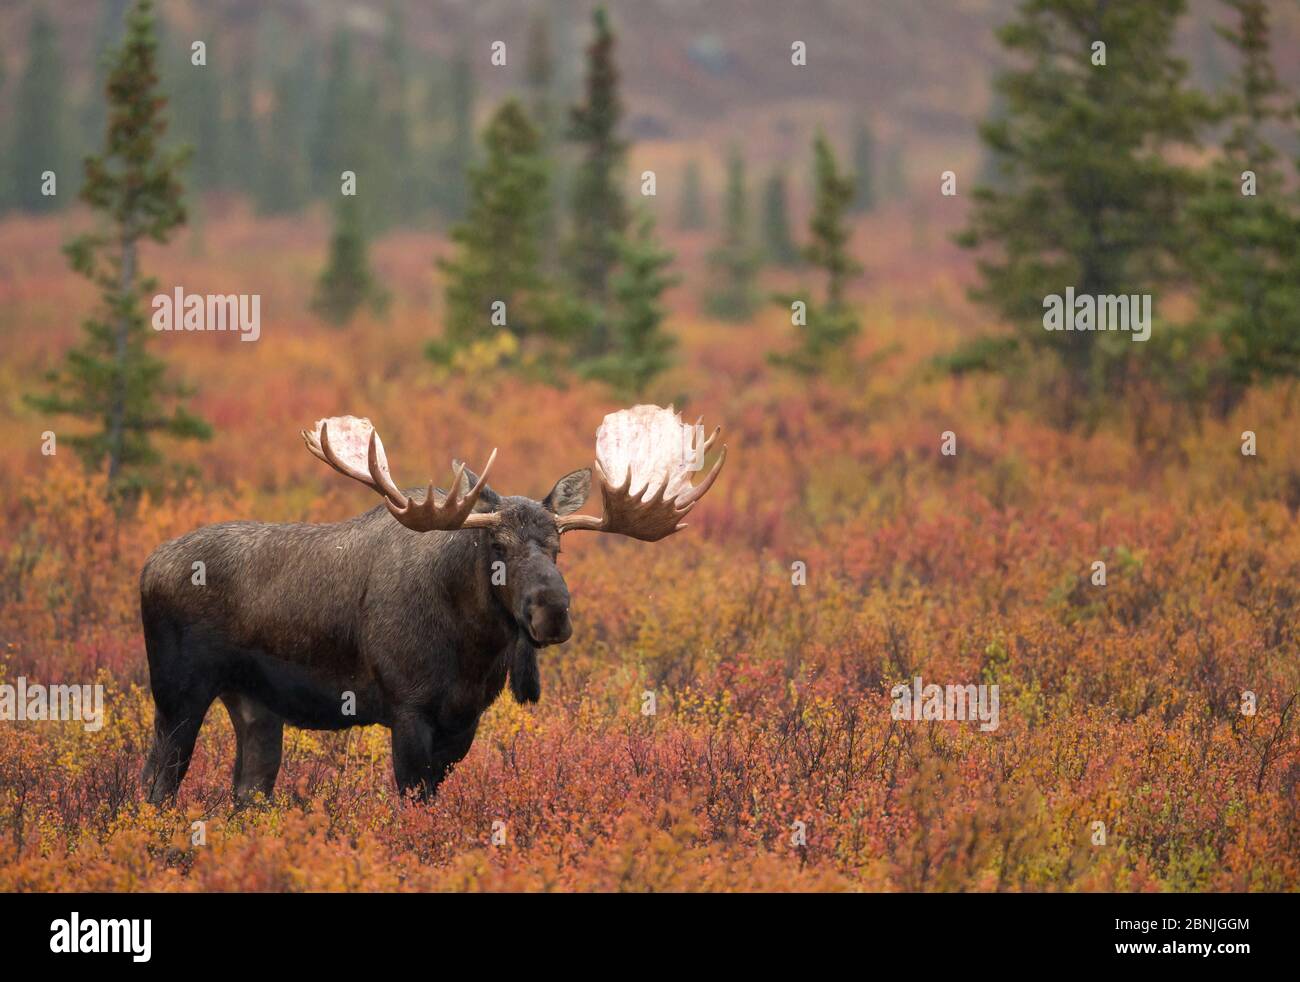 Moose bull (Alces alces) walking in forest clearing, Denali National Park, Alaska, USA, September Stock Photo